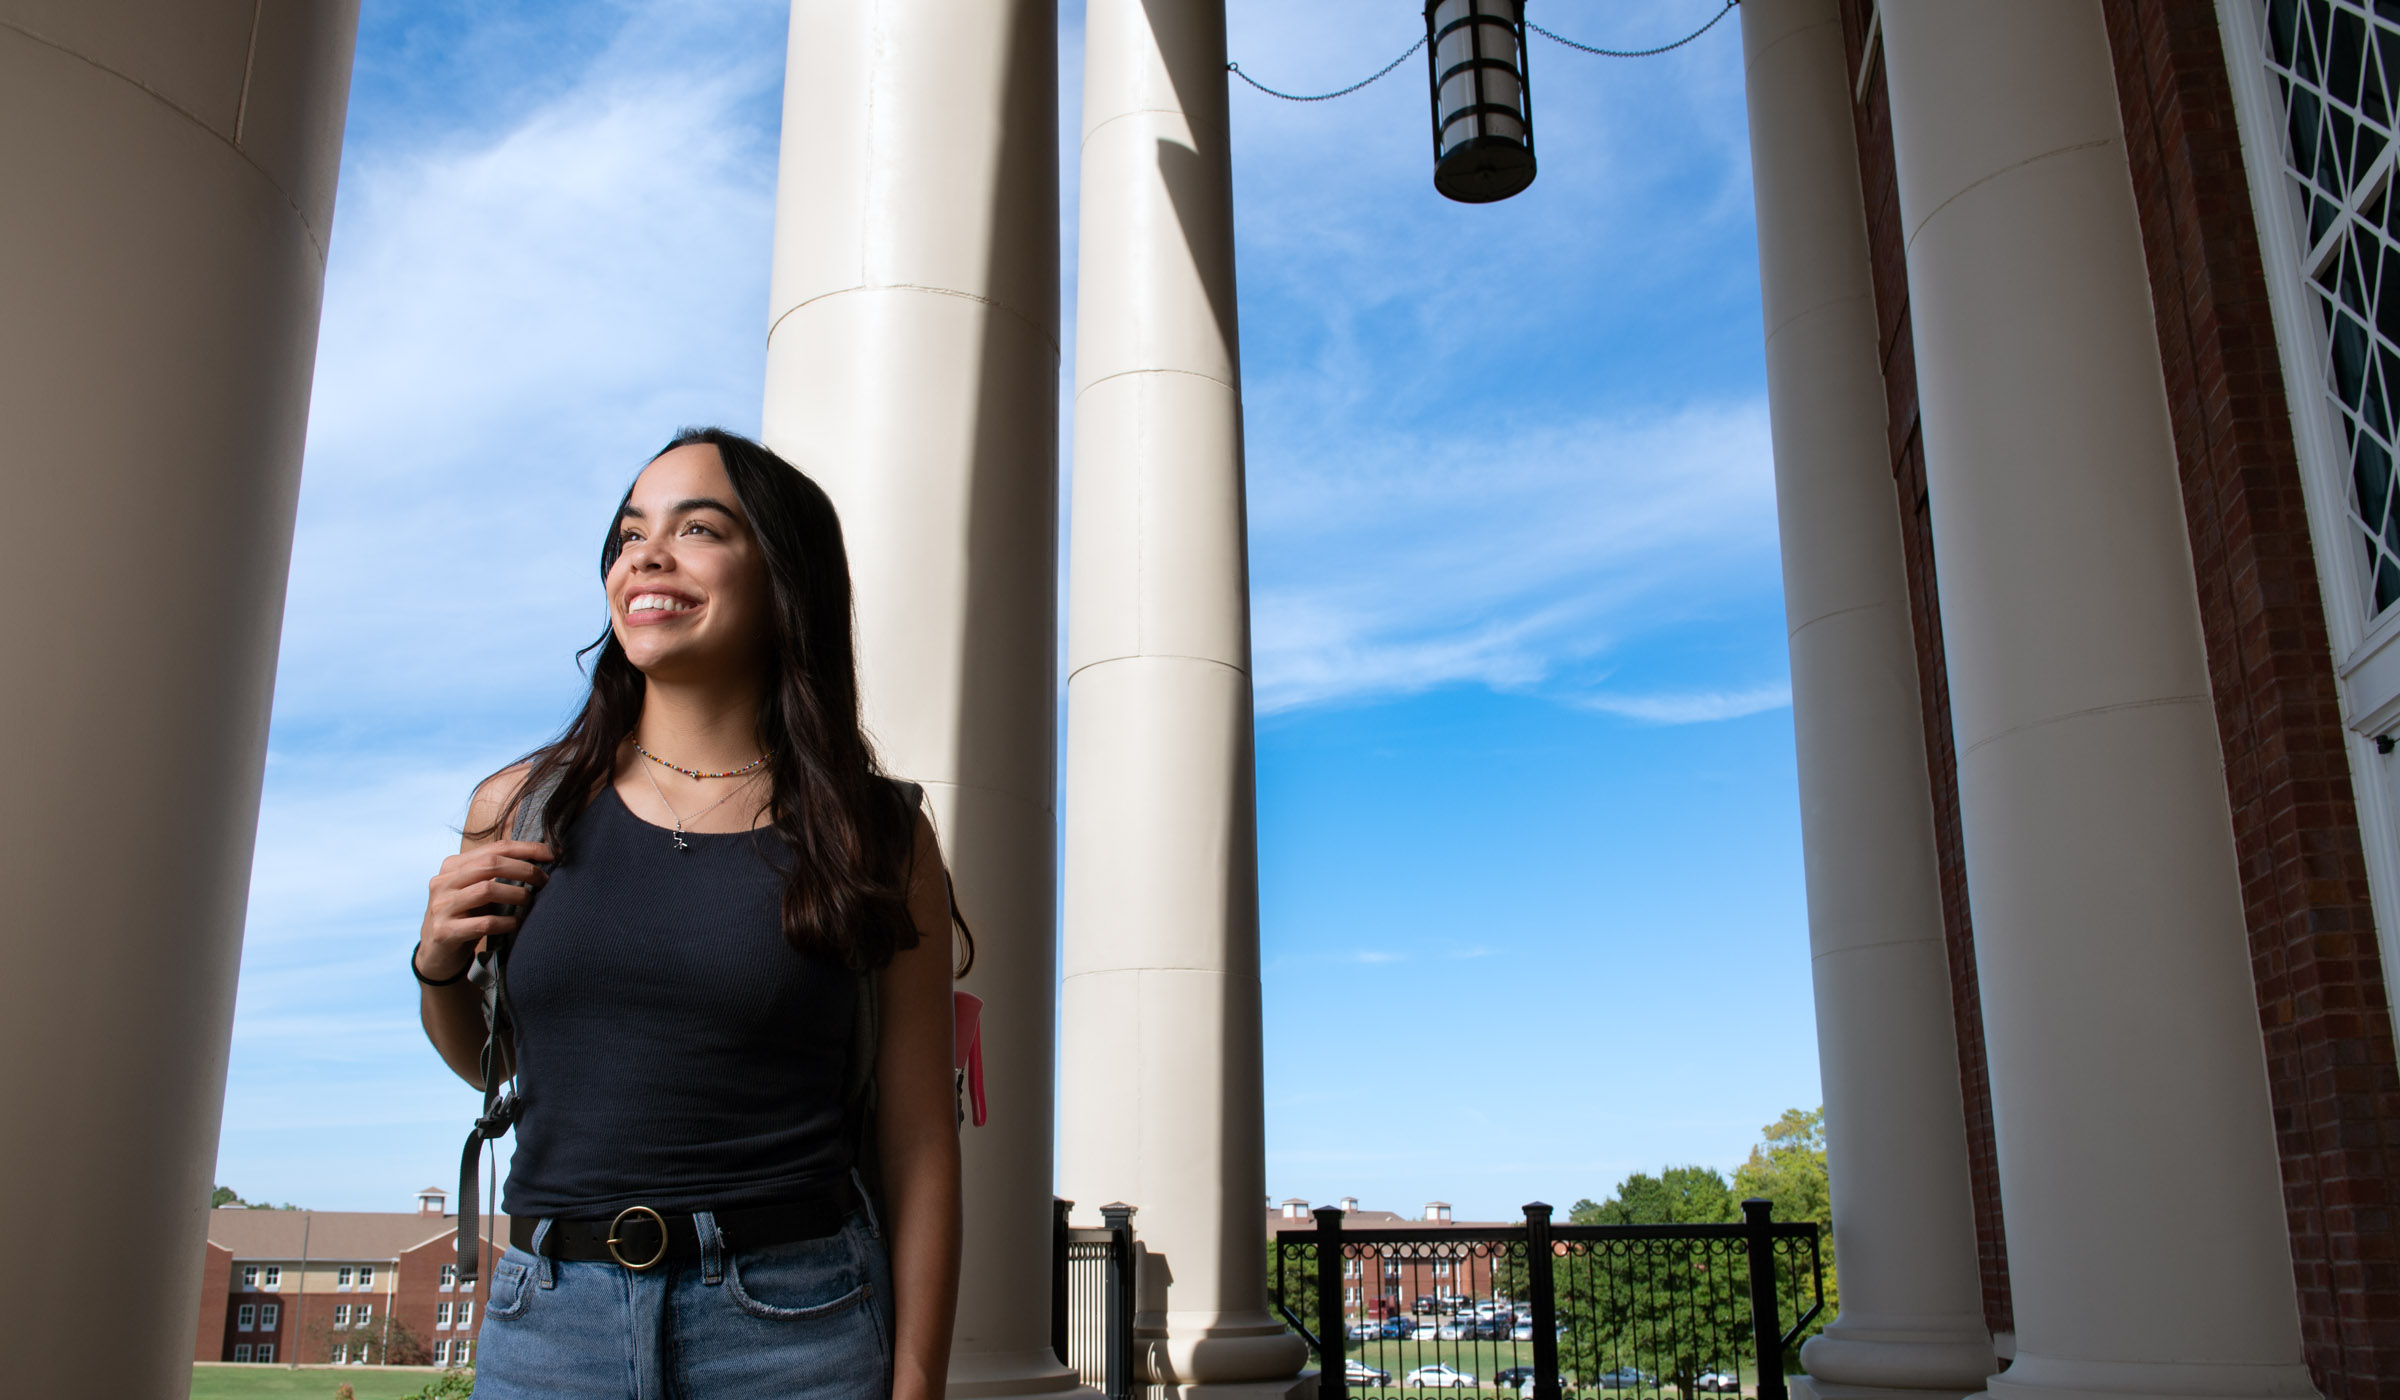 Laura Alvarez Rios, pictured in front of the tall columns at Old Main Academic Center